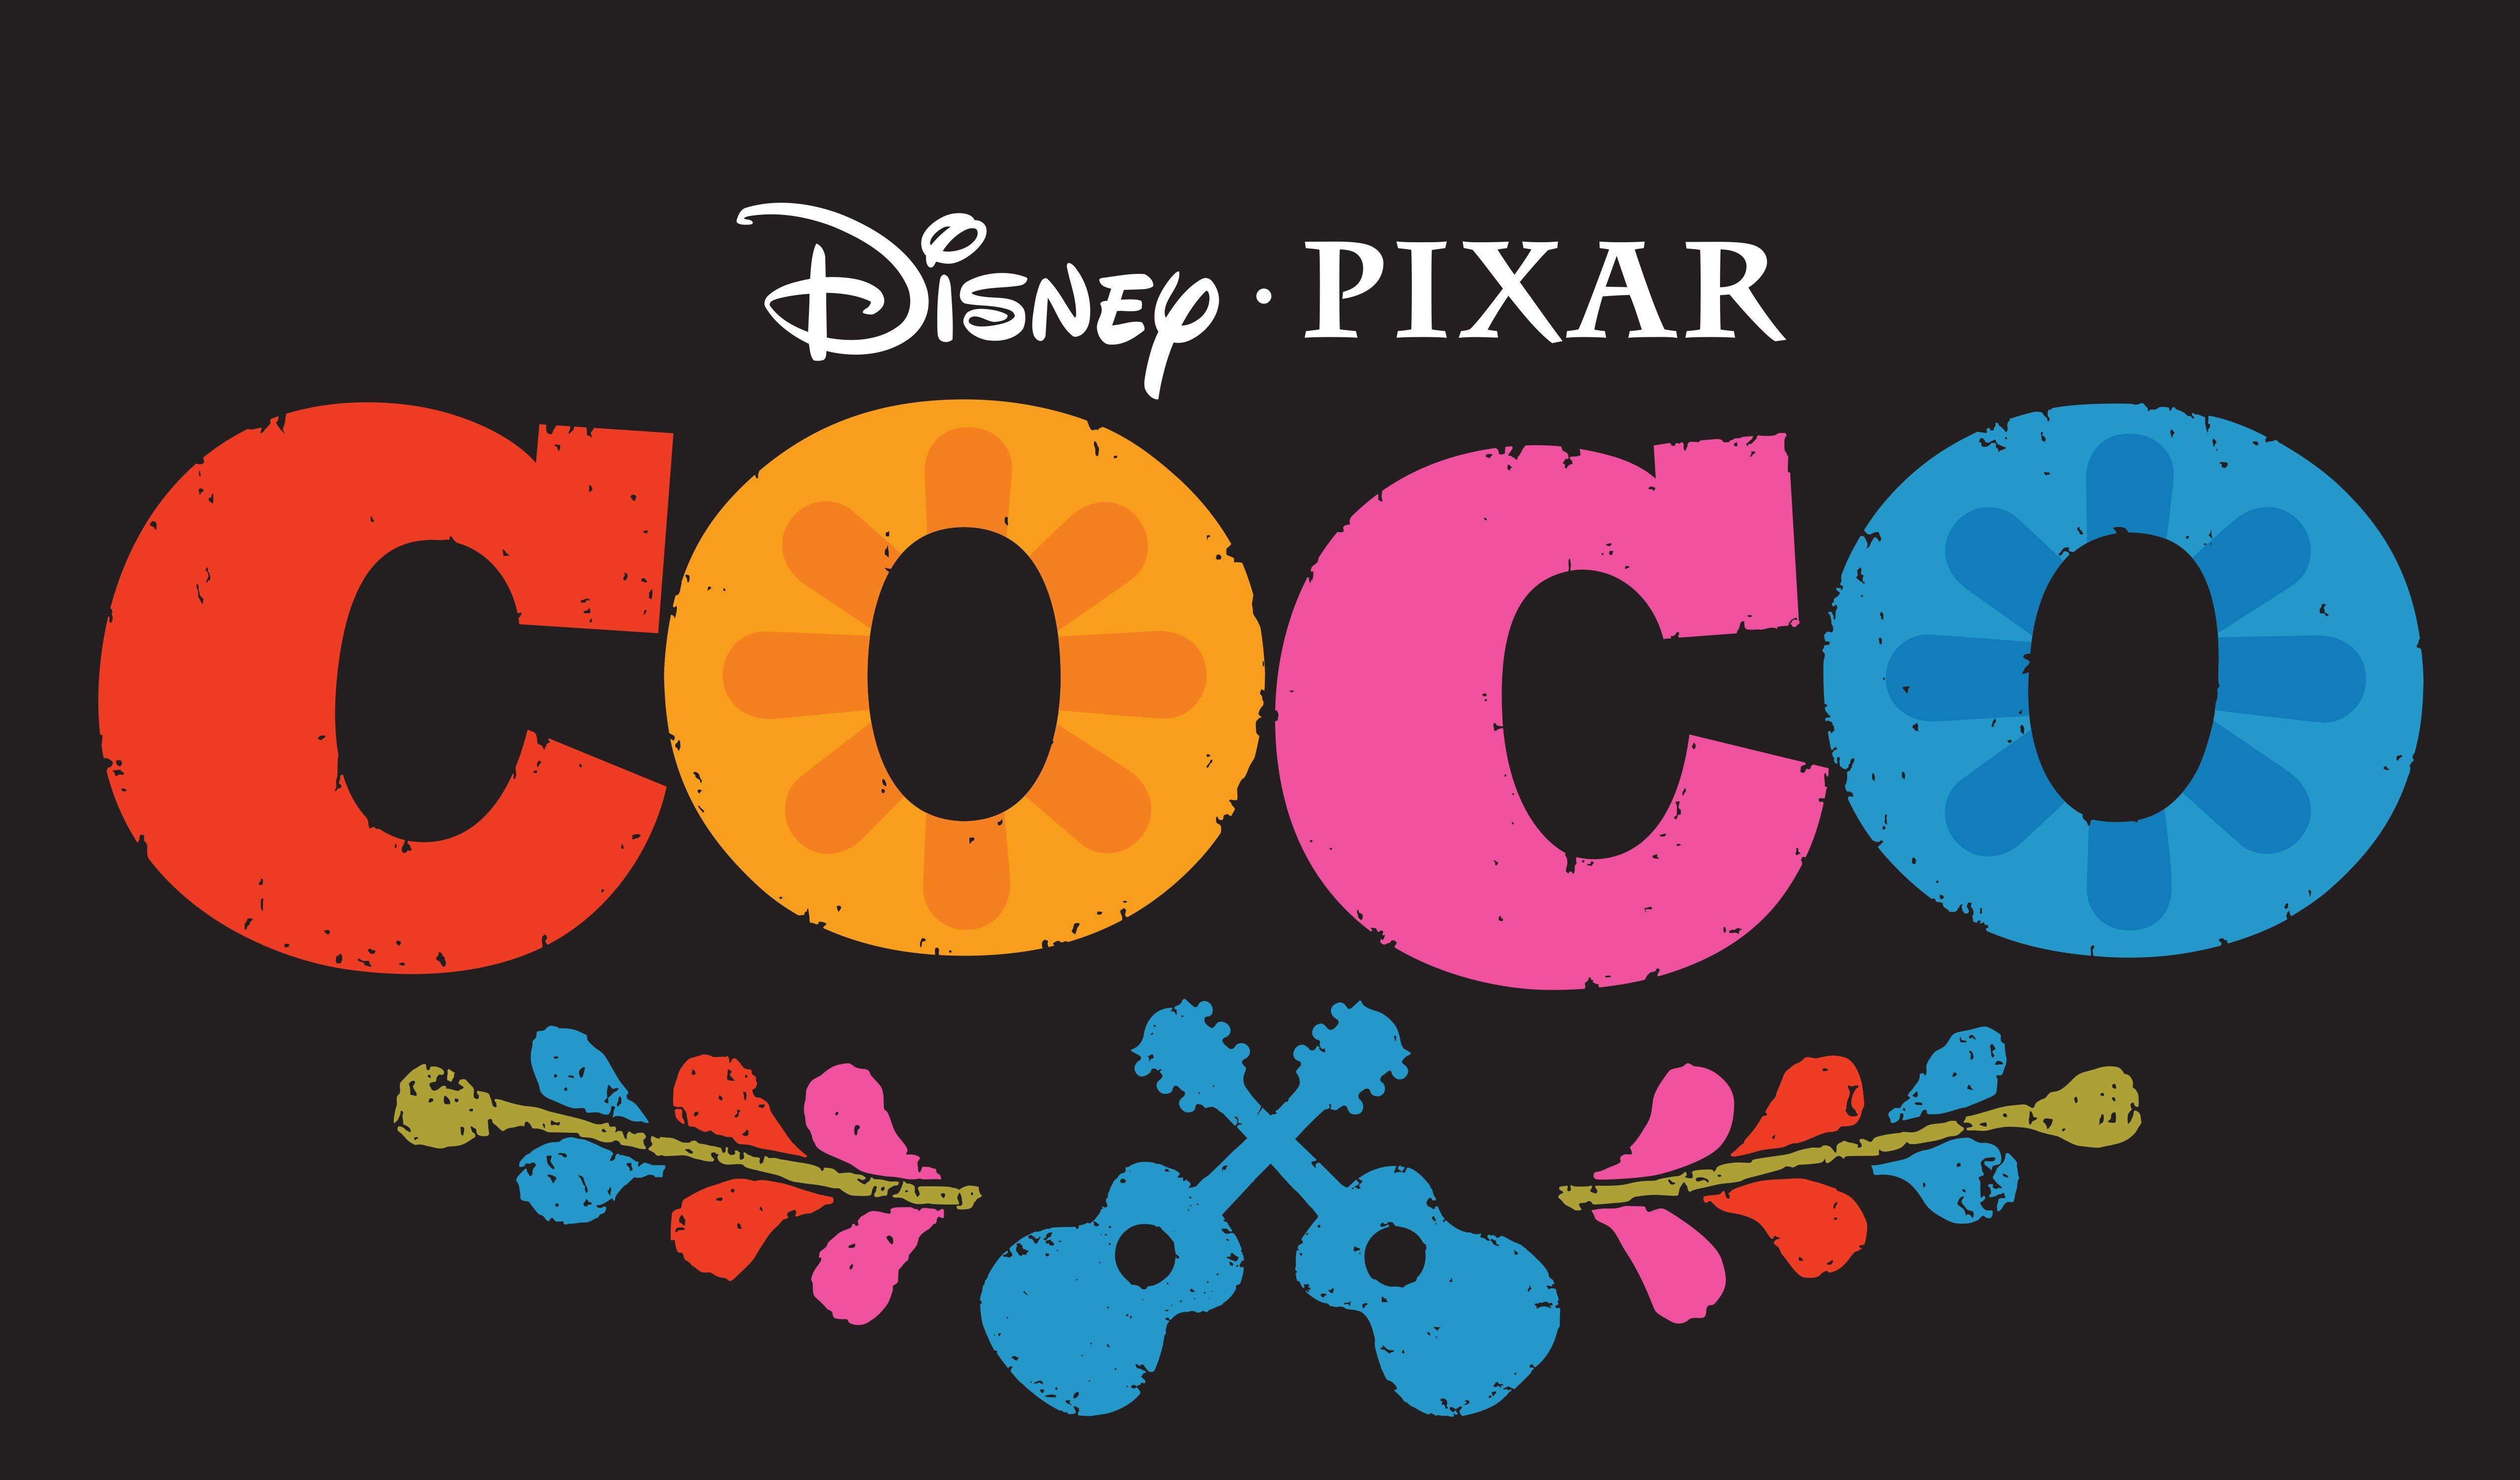 Disney Pixar Movie Logo - Pixar's Coco Is a “Love Letter to Mexico” in the Age of Trump ...